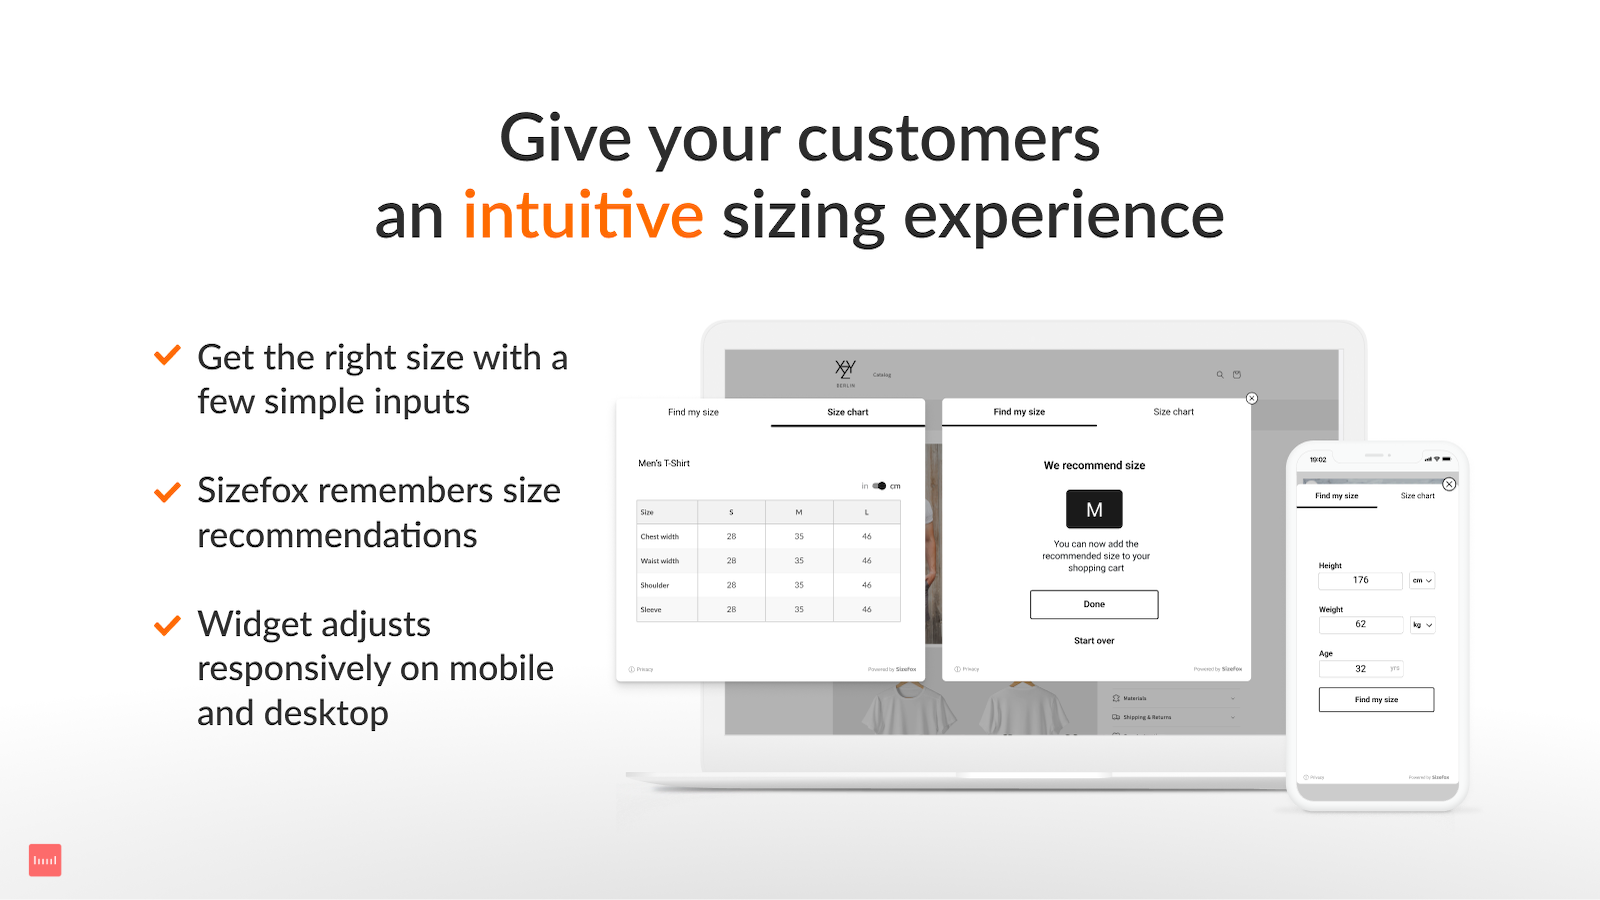 Give your customers an intuitive sizing experience